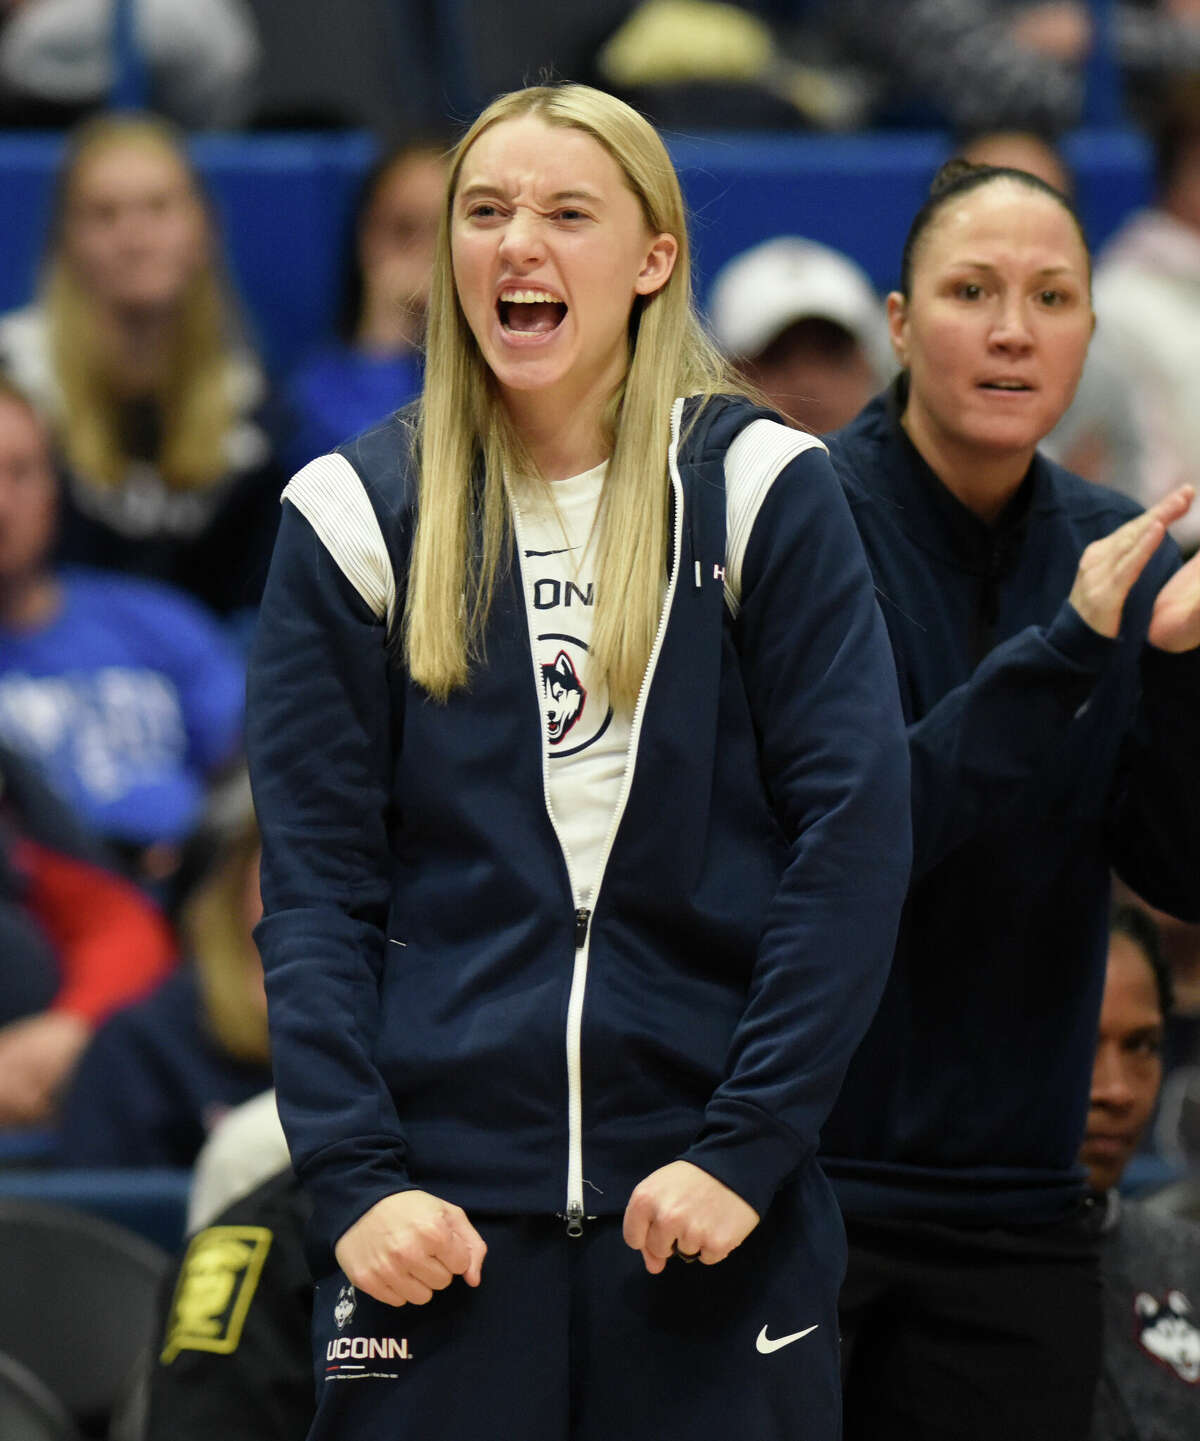 UConn guard Paige Bueckers cheers her team on from the sidelines during No. 5 UConn's 91-69 win over No. 10 NC State in the NCAA women's college basketball game at the XL Center in Hartford, Conn. Sunday, Nov. 20, 2022.